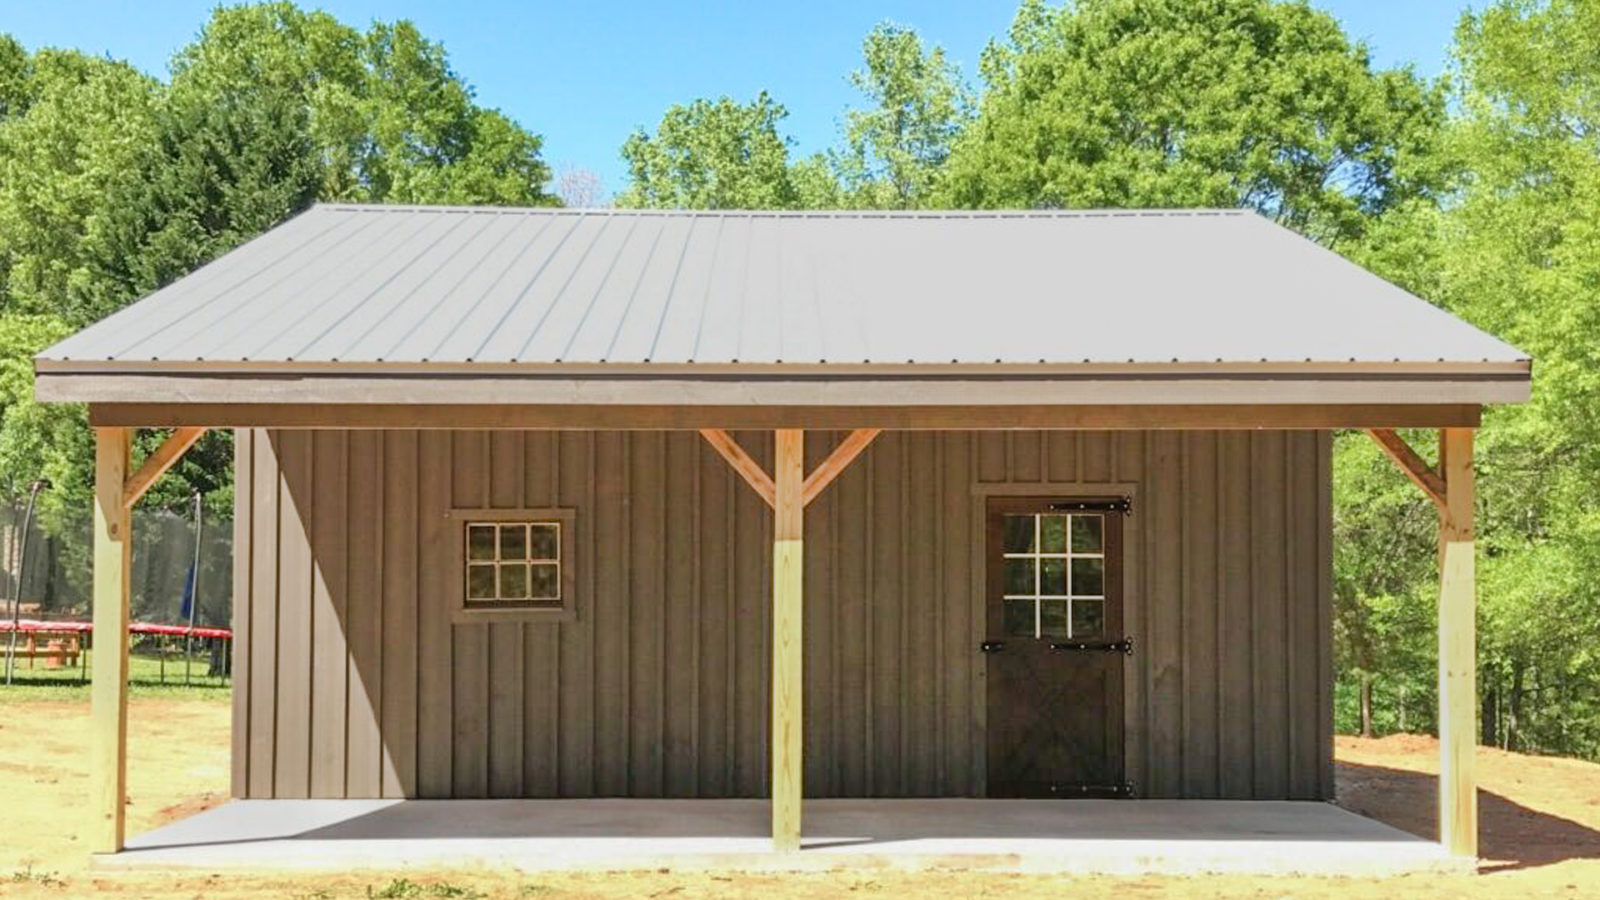 exterior of horse lean-to shed with concrete walkway